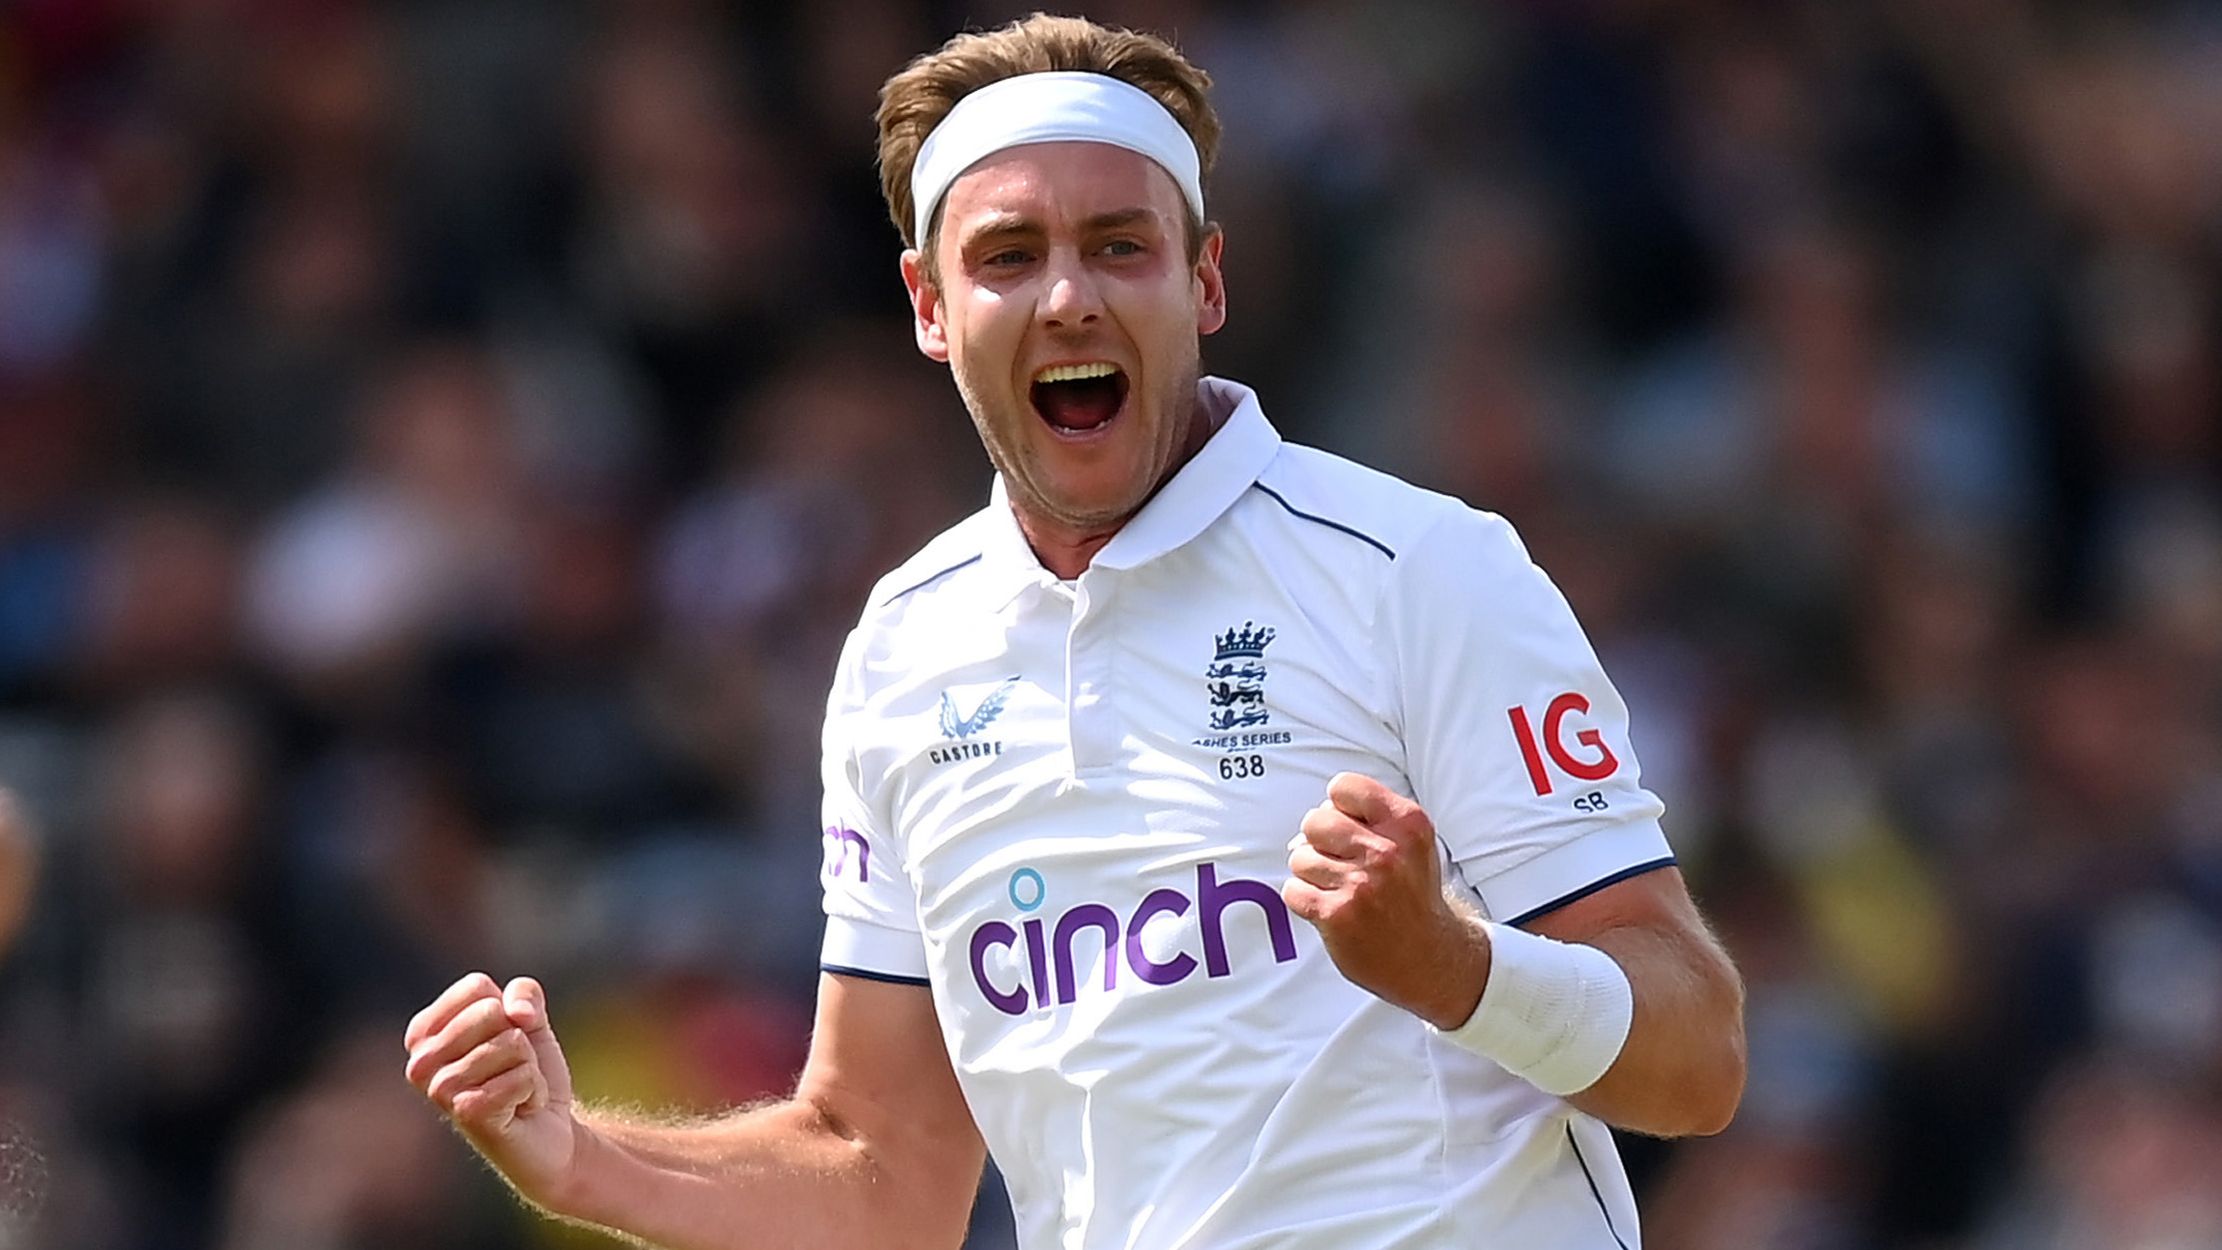 'A true champion': Tributes flow for Stuart Broad after England star's shock retirement call